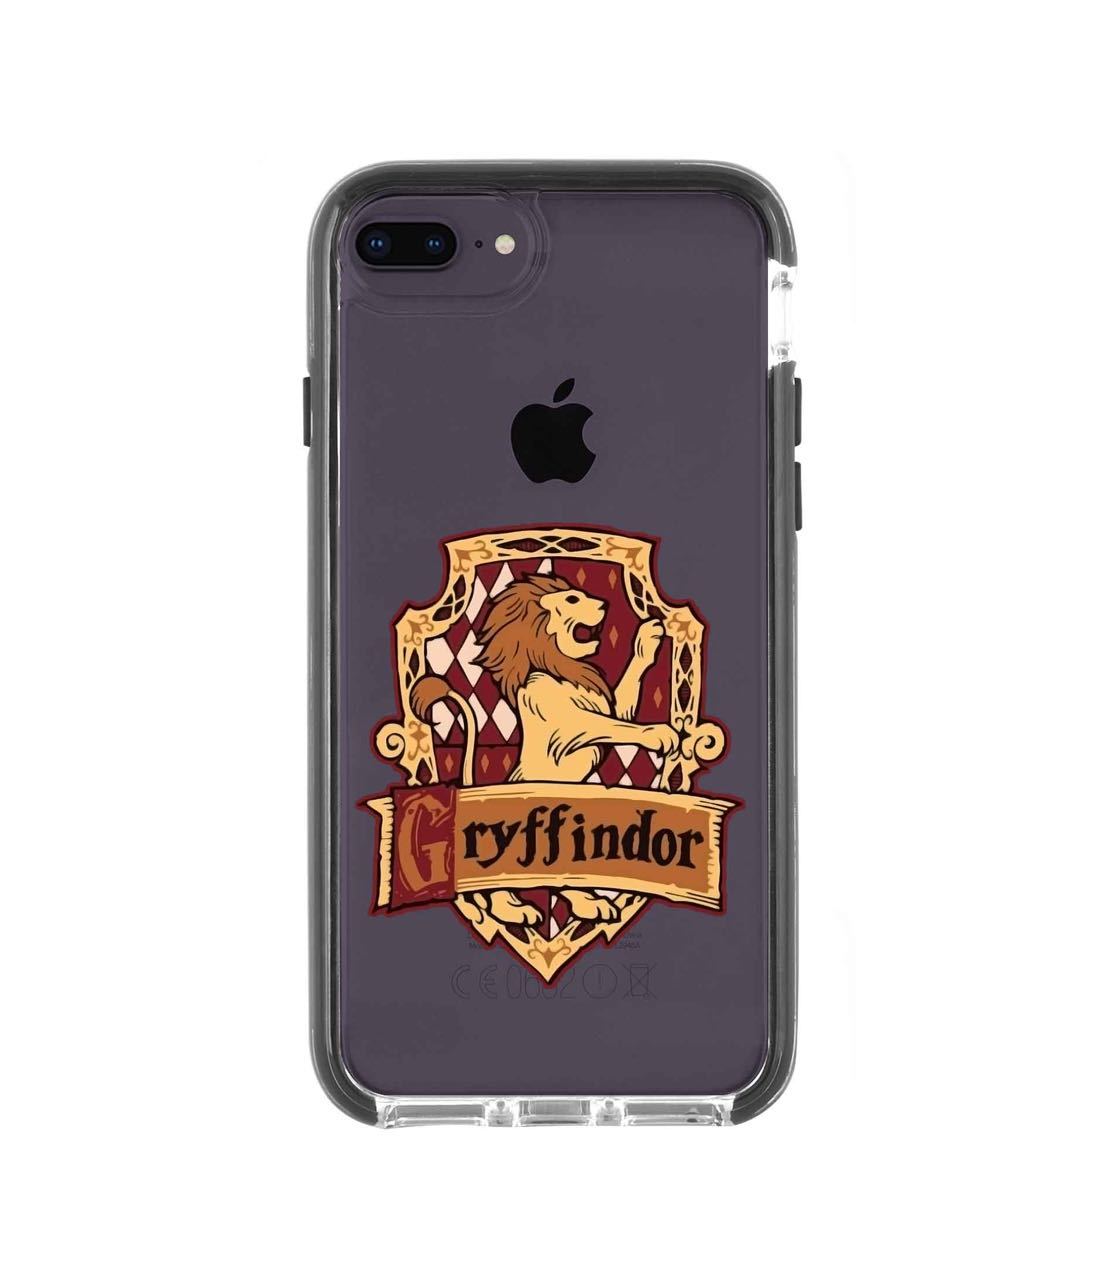 Crest Gryffindor - Extreme Phone Case for iPhone 8 Plus